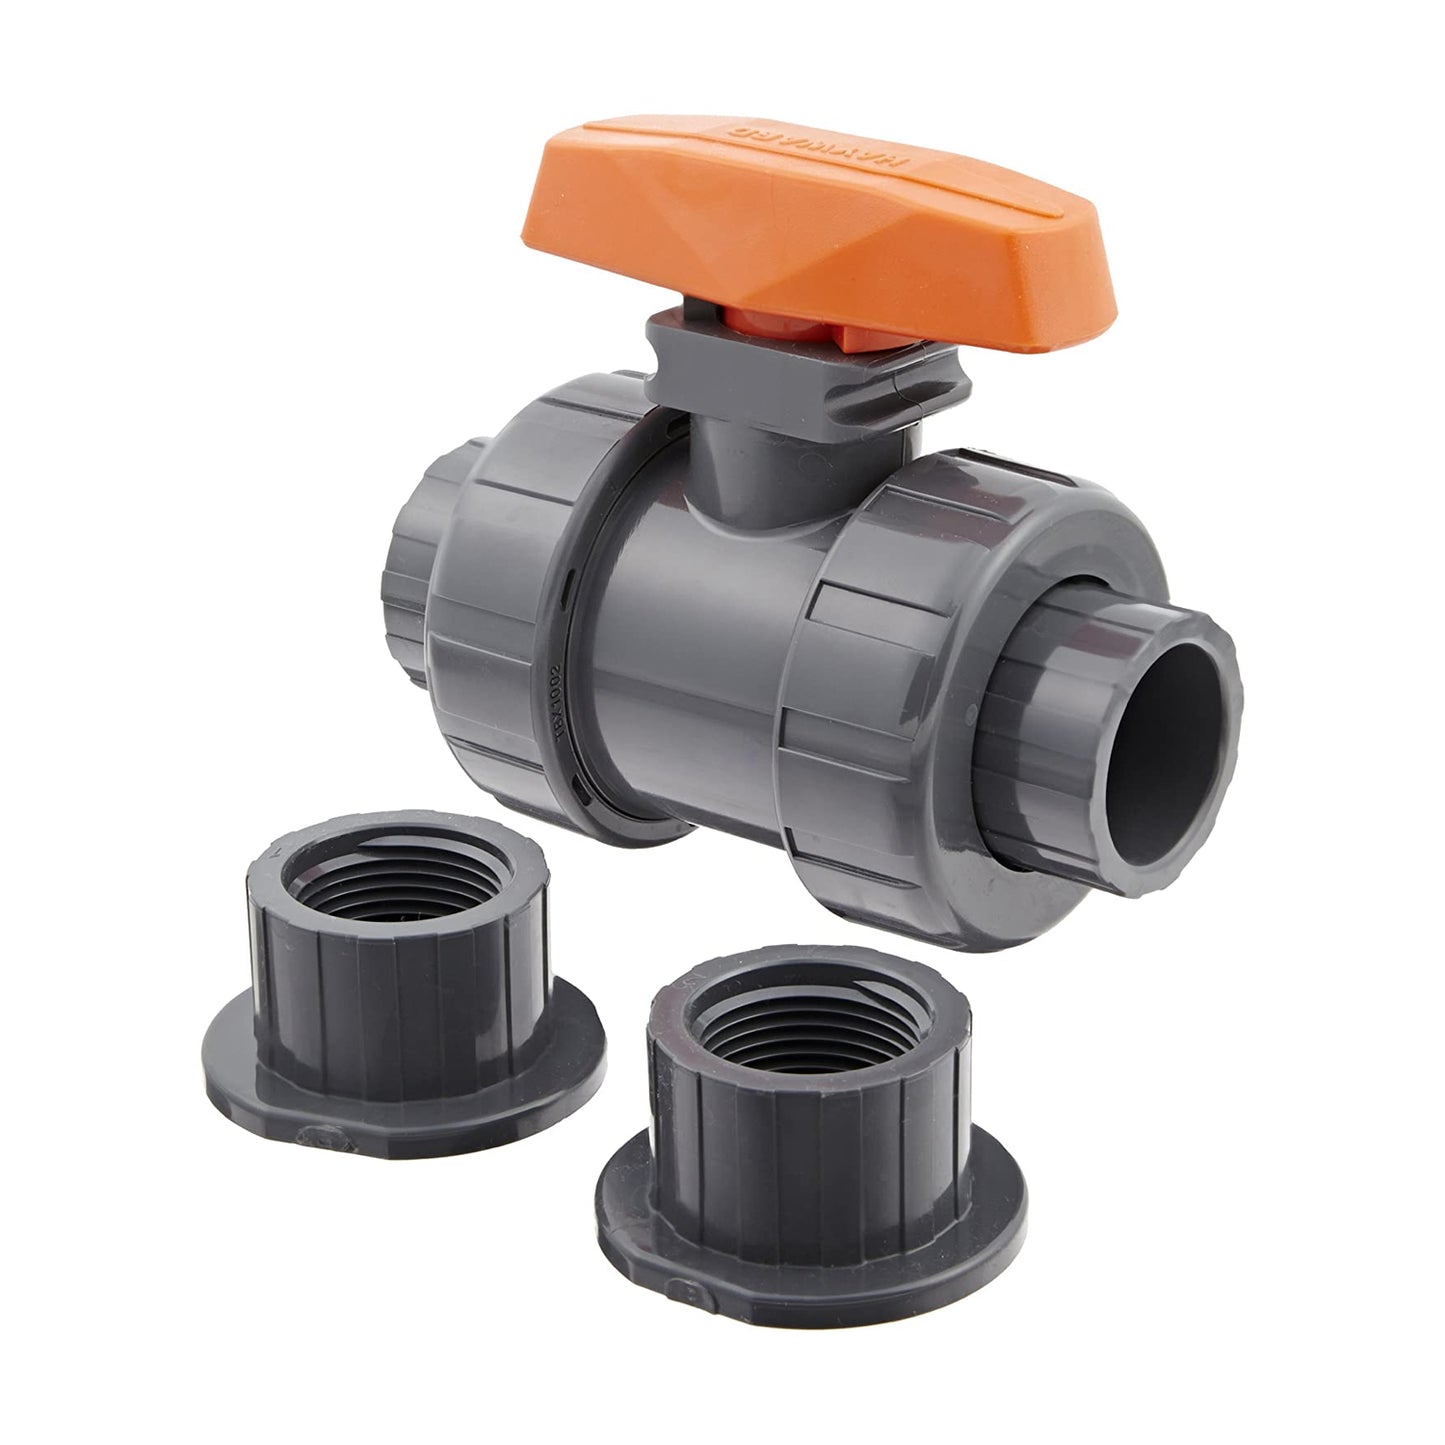 1" PVC TBH Series Ball Valve Socket or Threaded Ends - FPM Seals